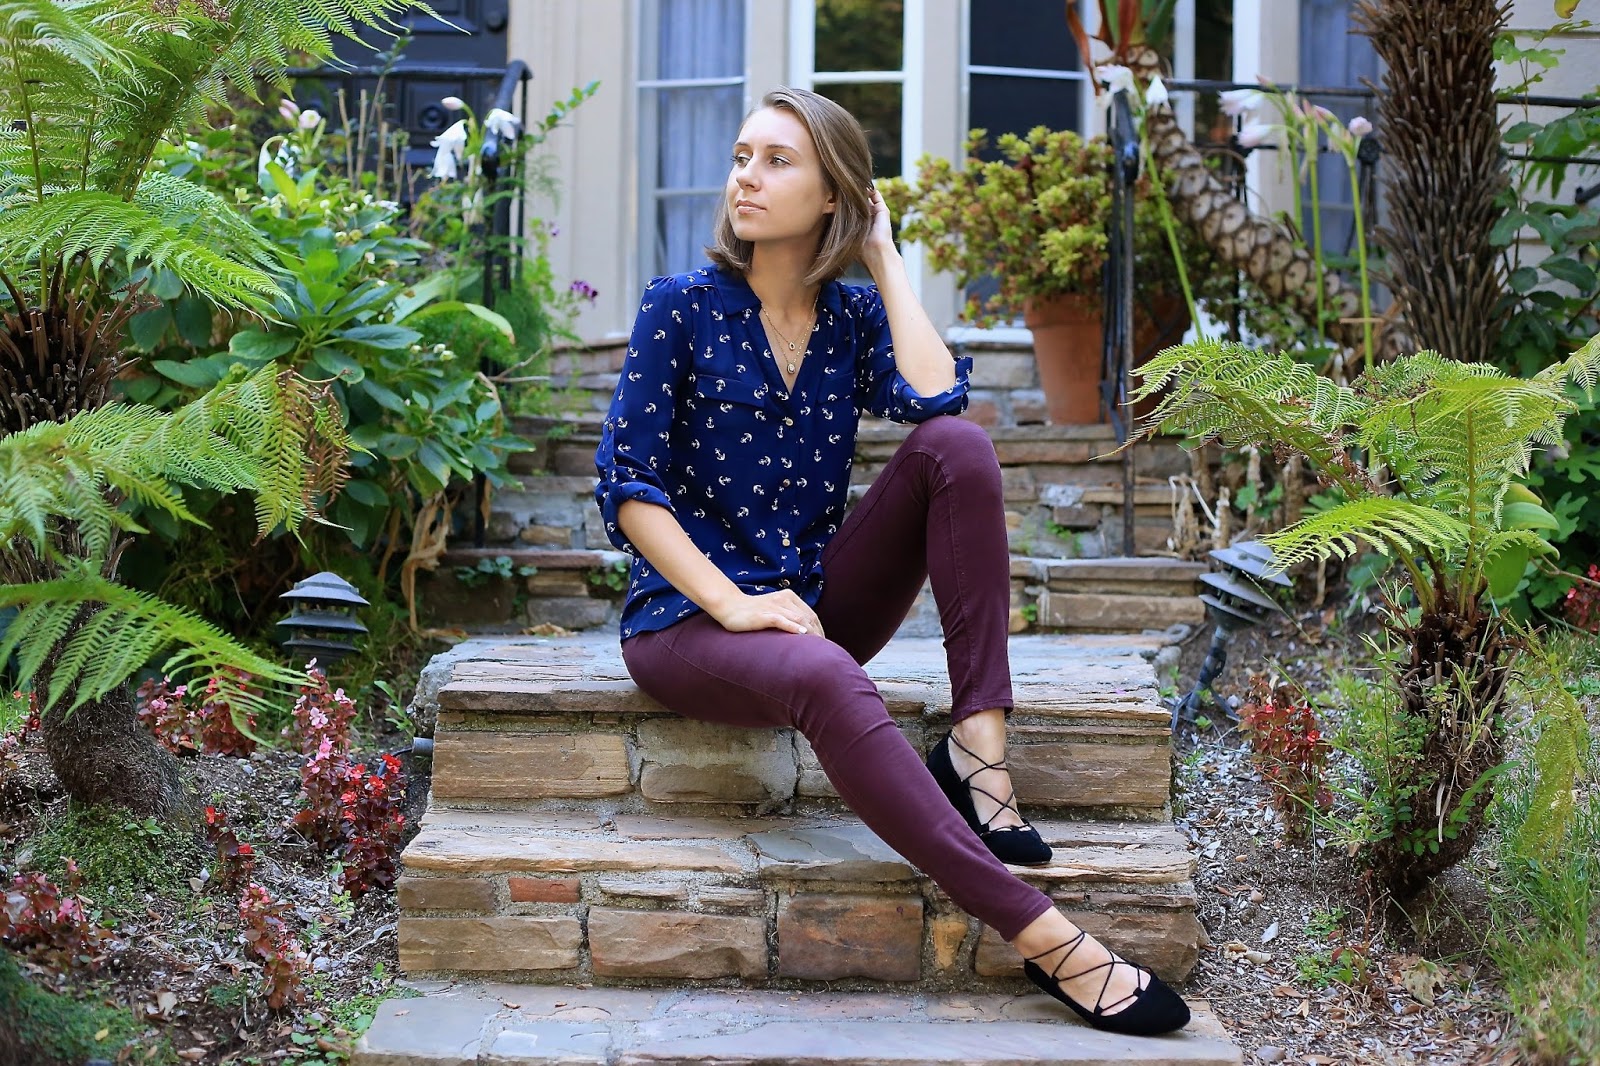 lucky brand lace up flats